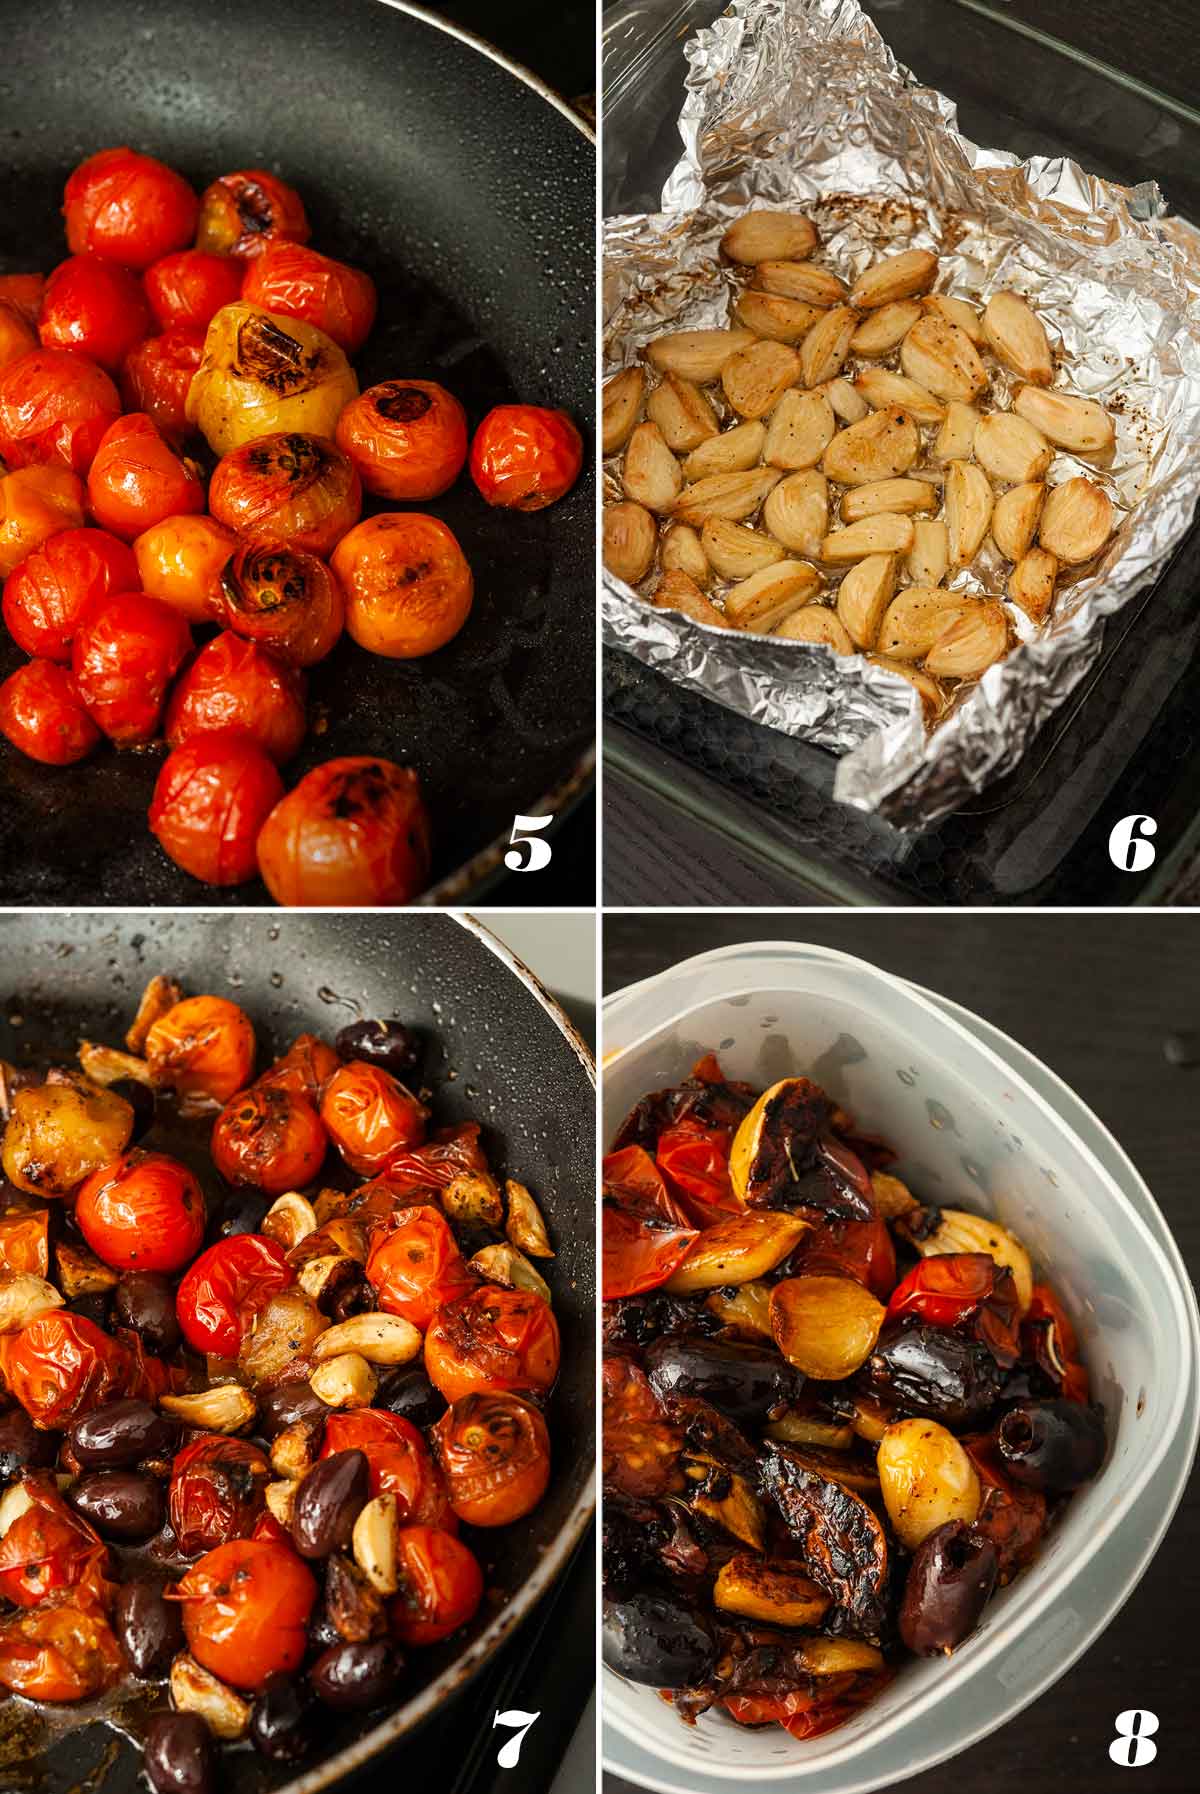 A collage of 4 numbered images showing how to make tomato bruschetta topping.